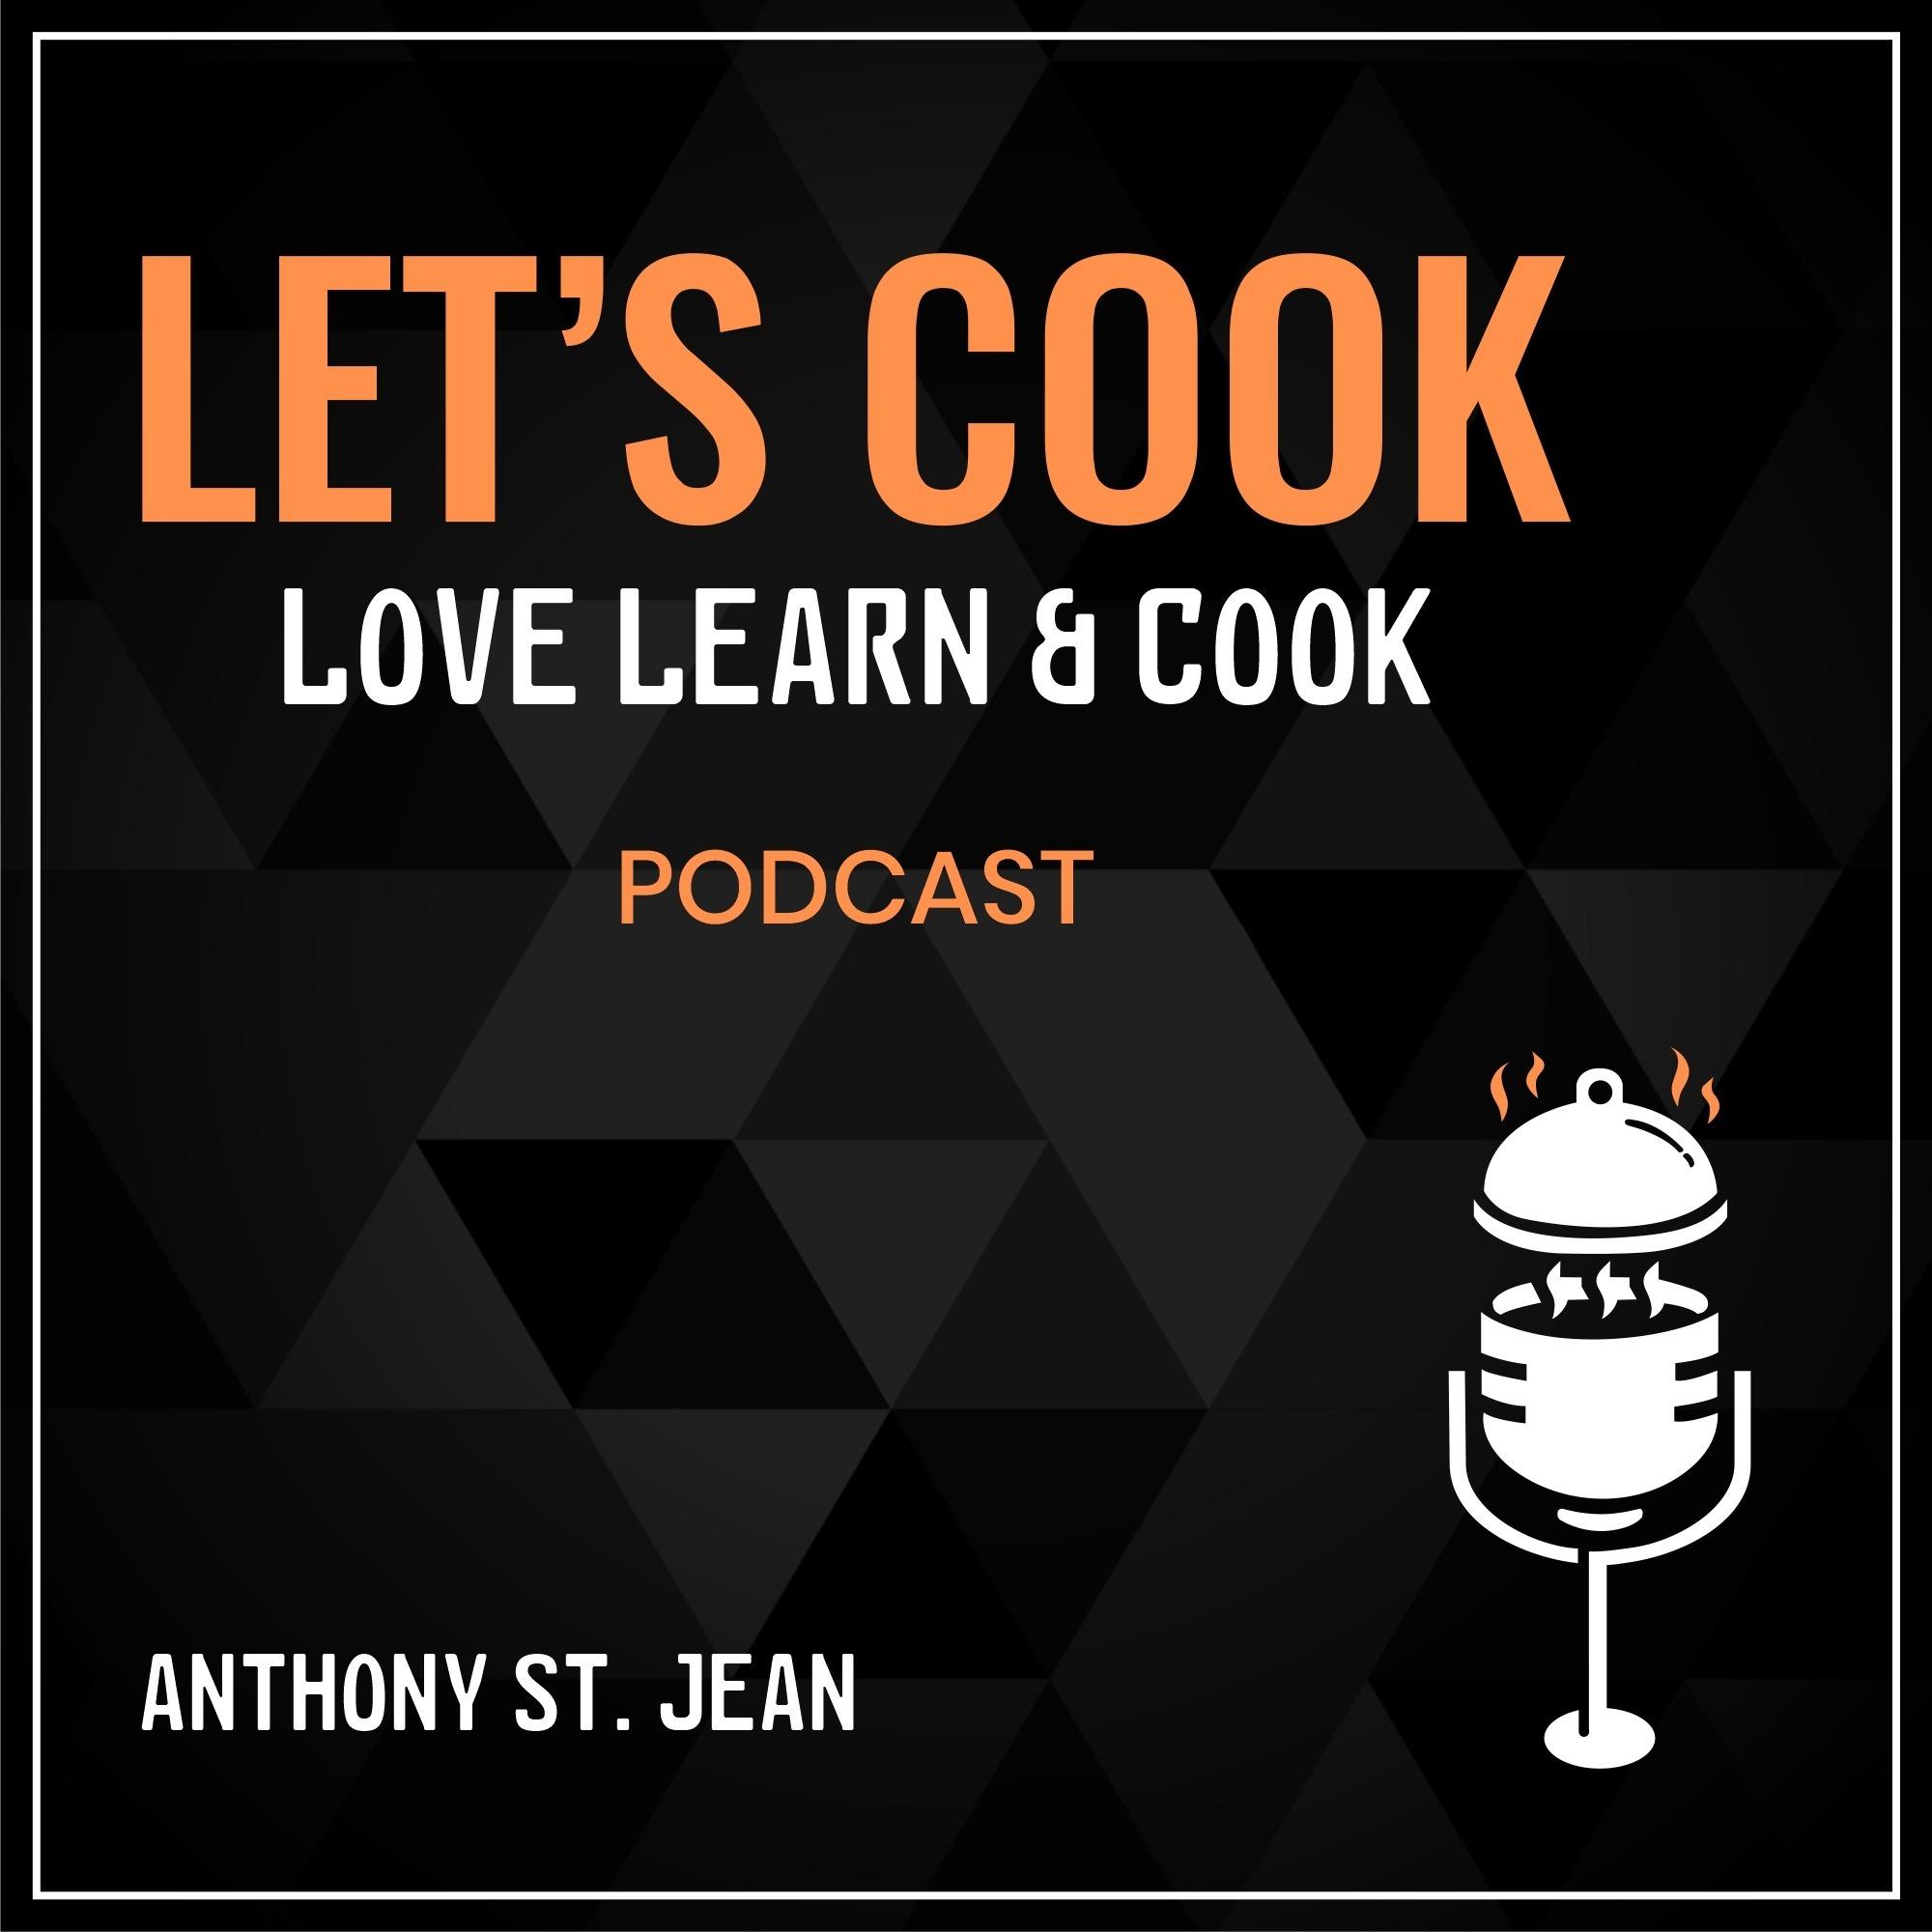 The Let's Cook Podcast